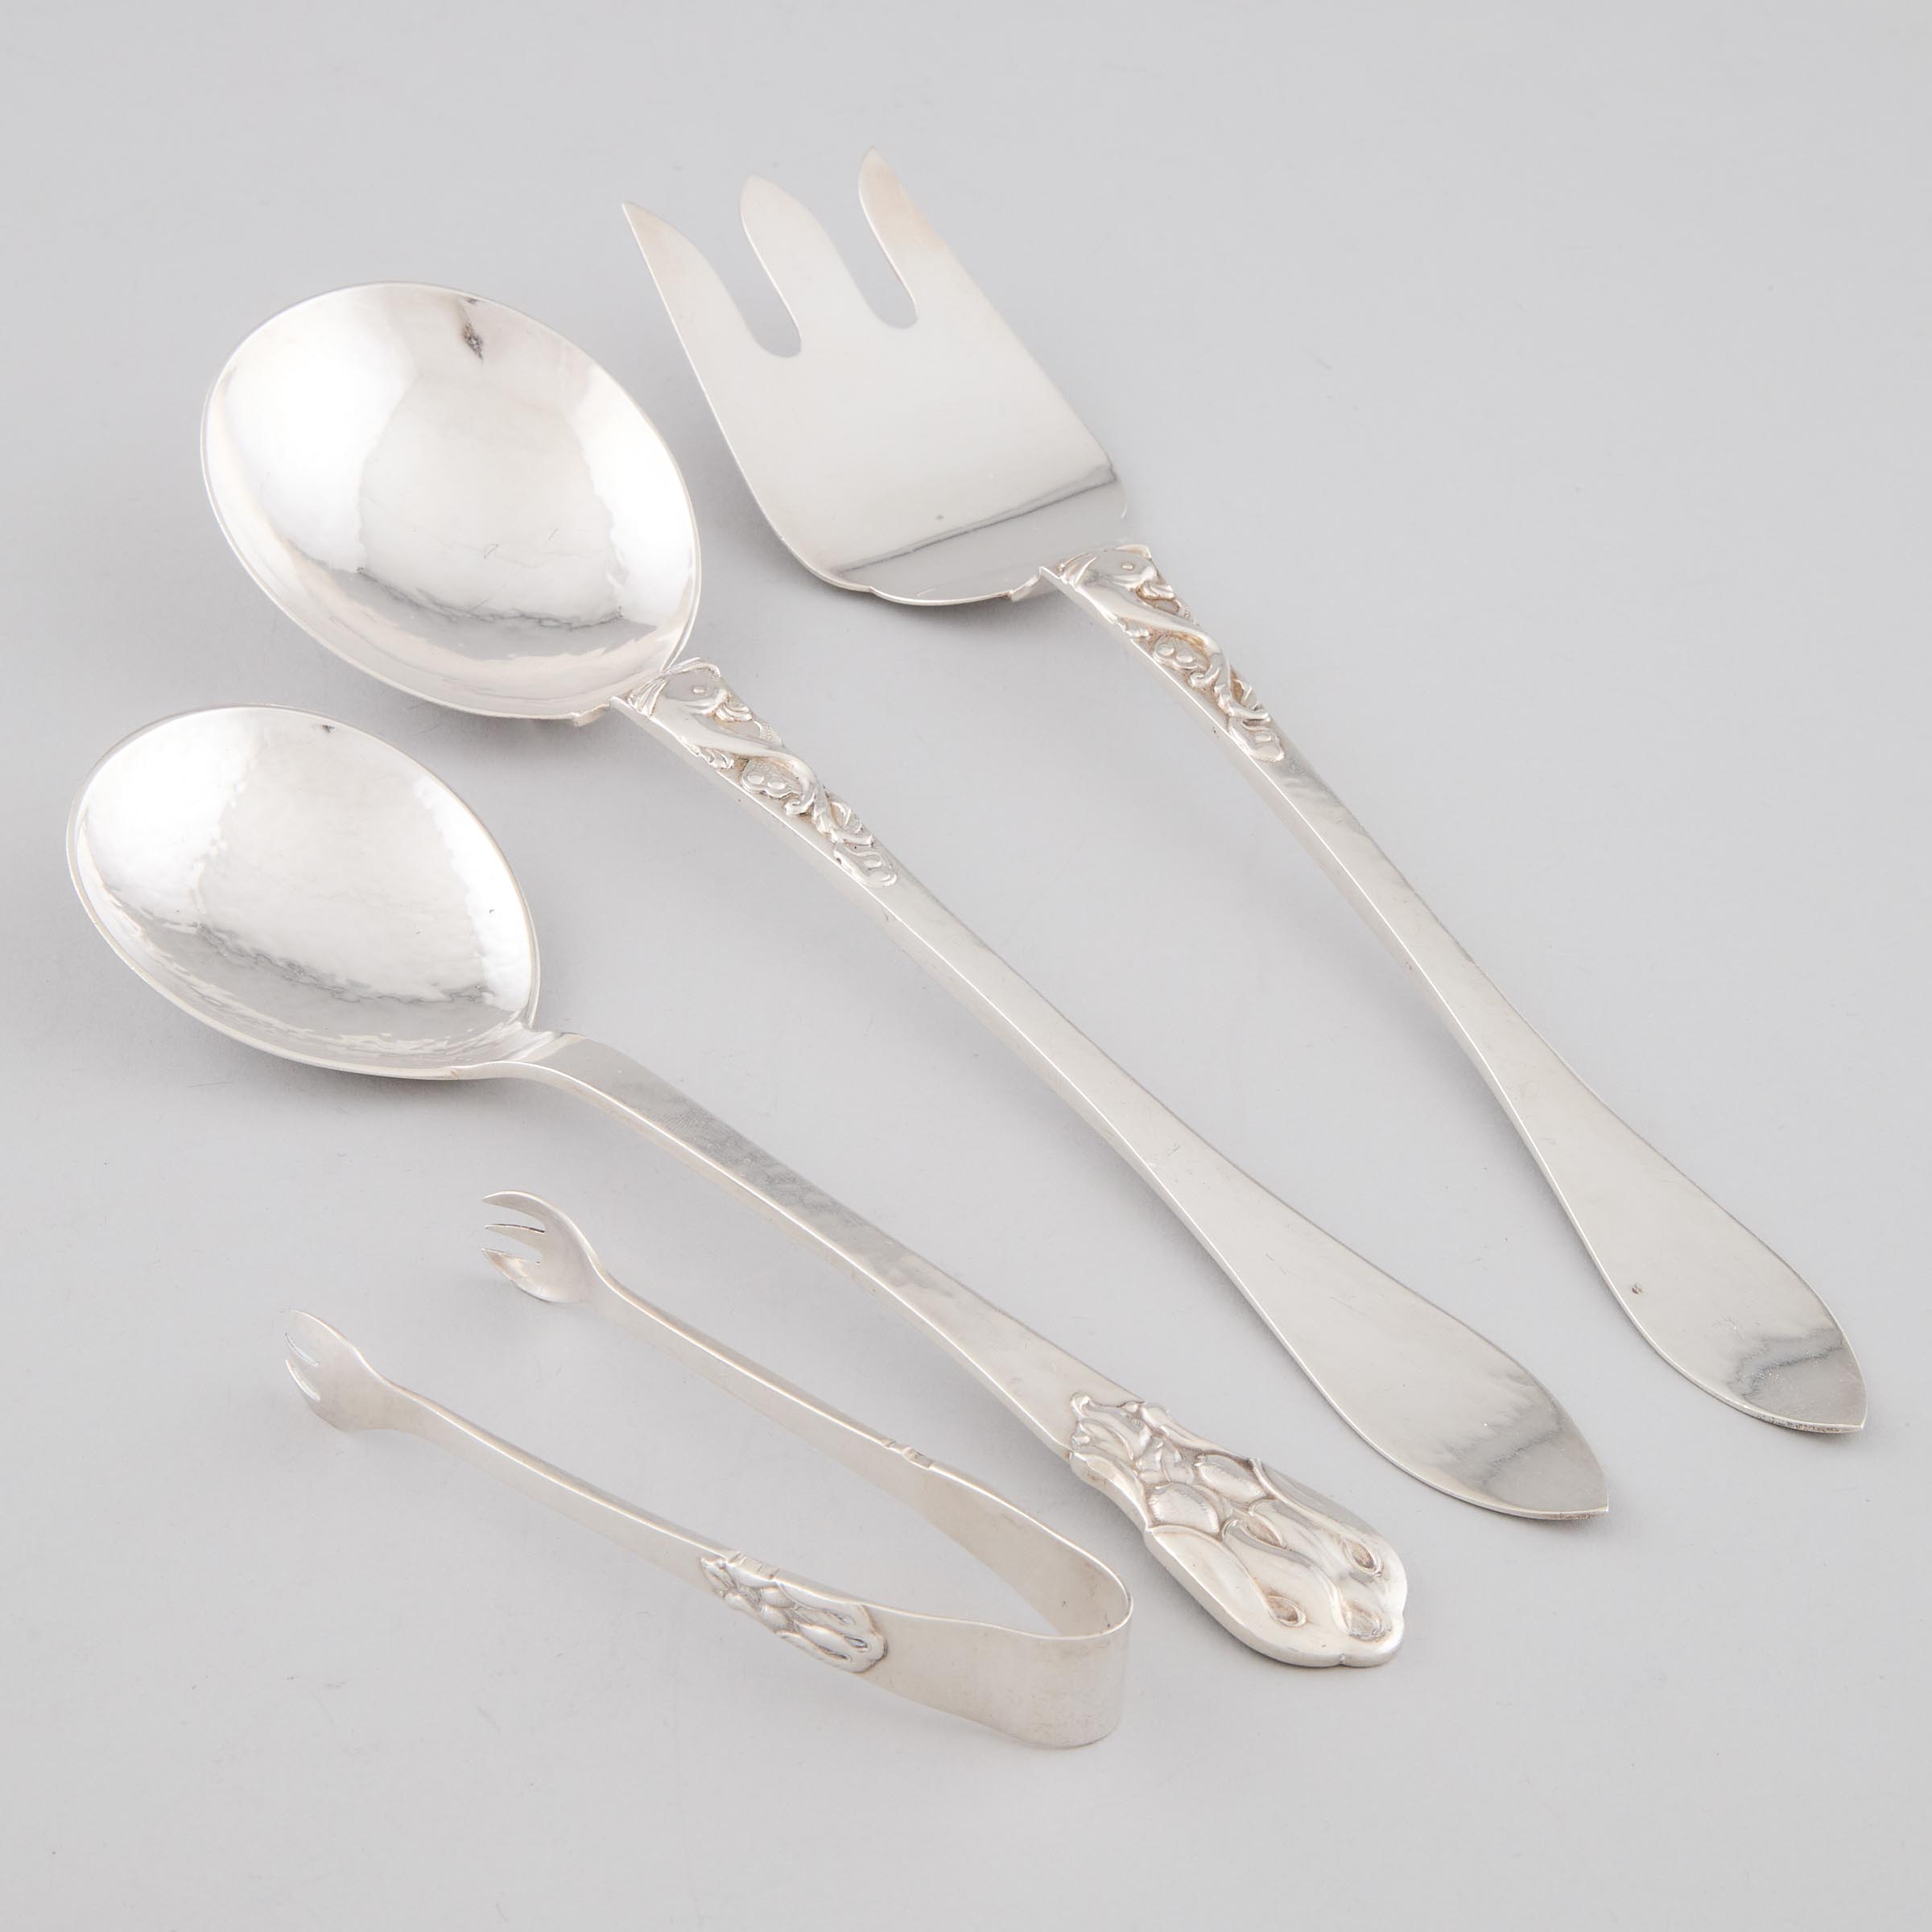 Pair of Canadian Silver Salad Servers  2fb0423